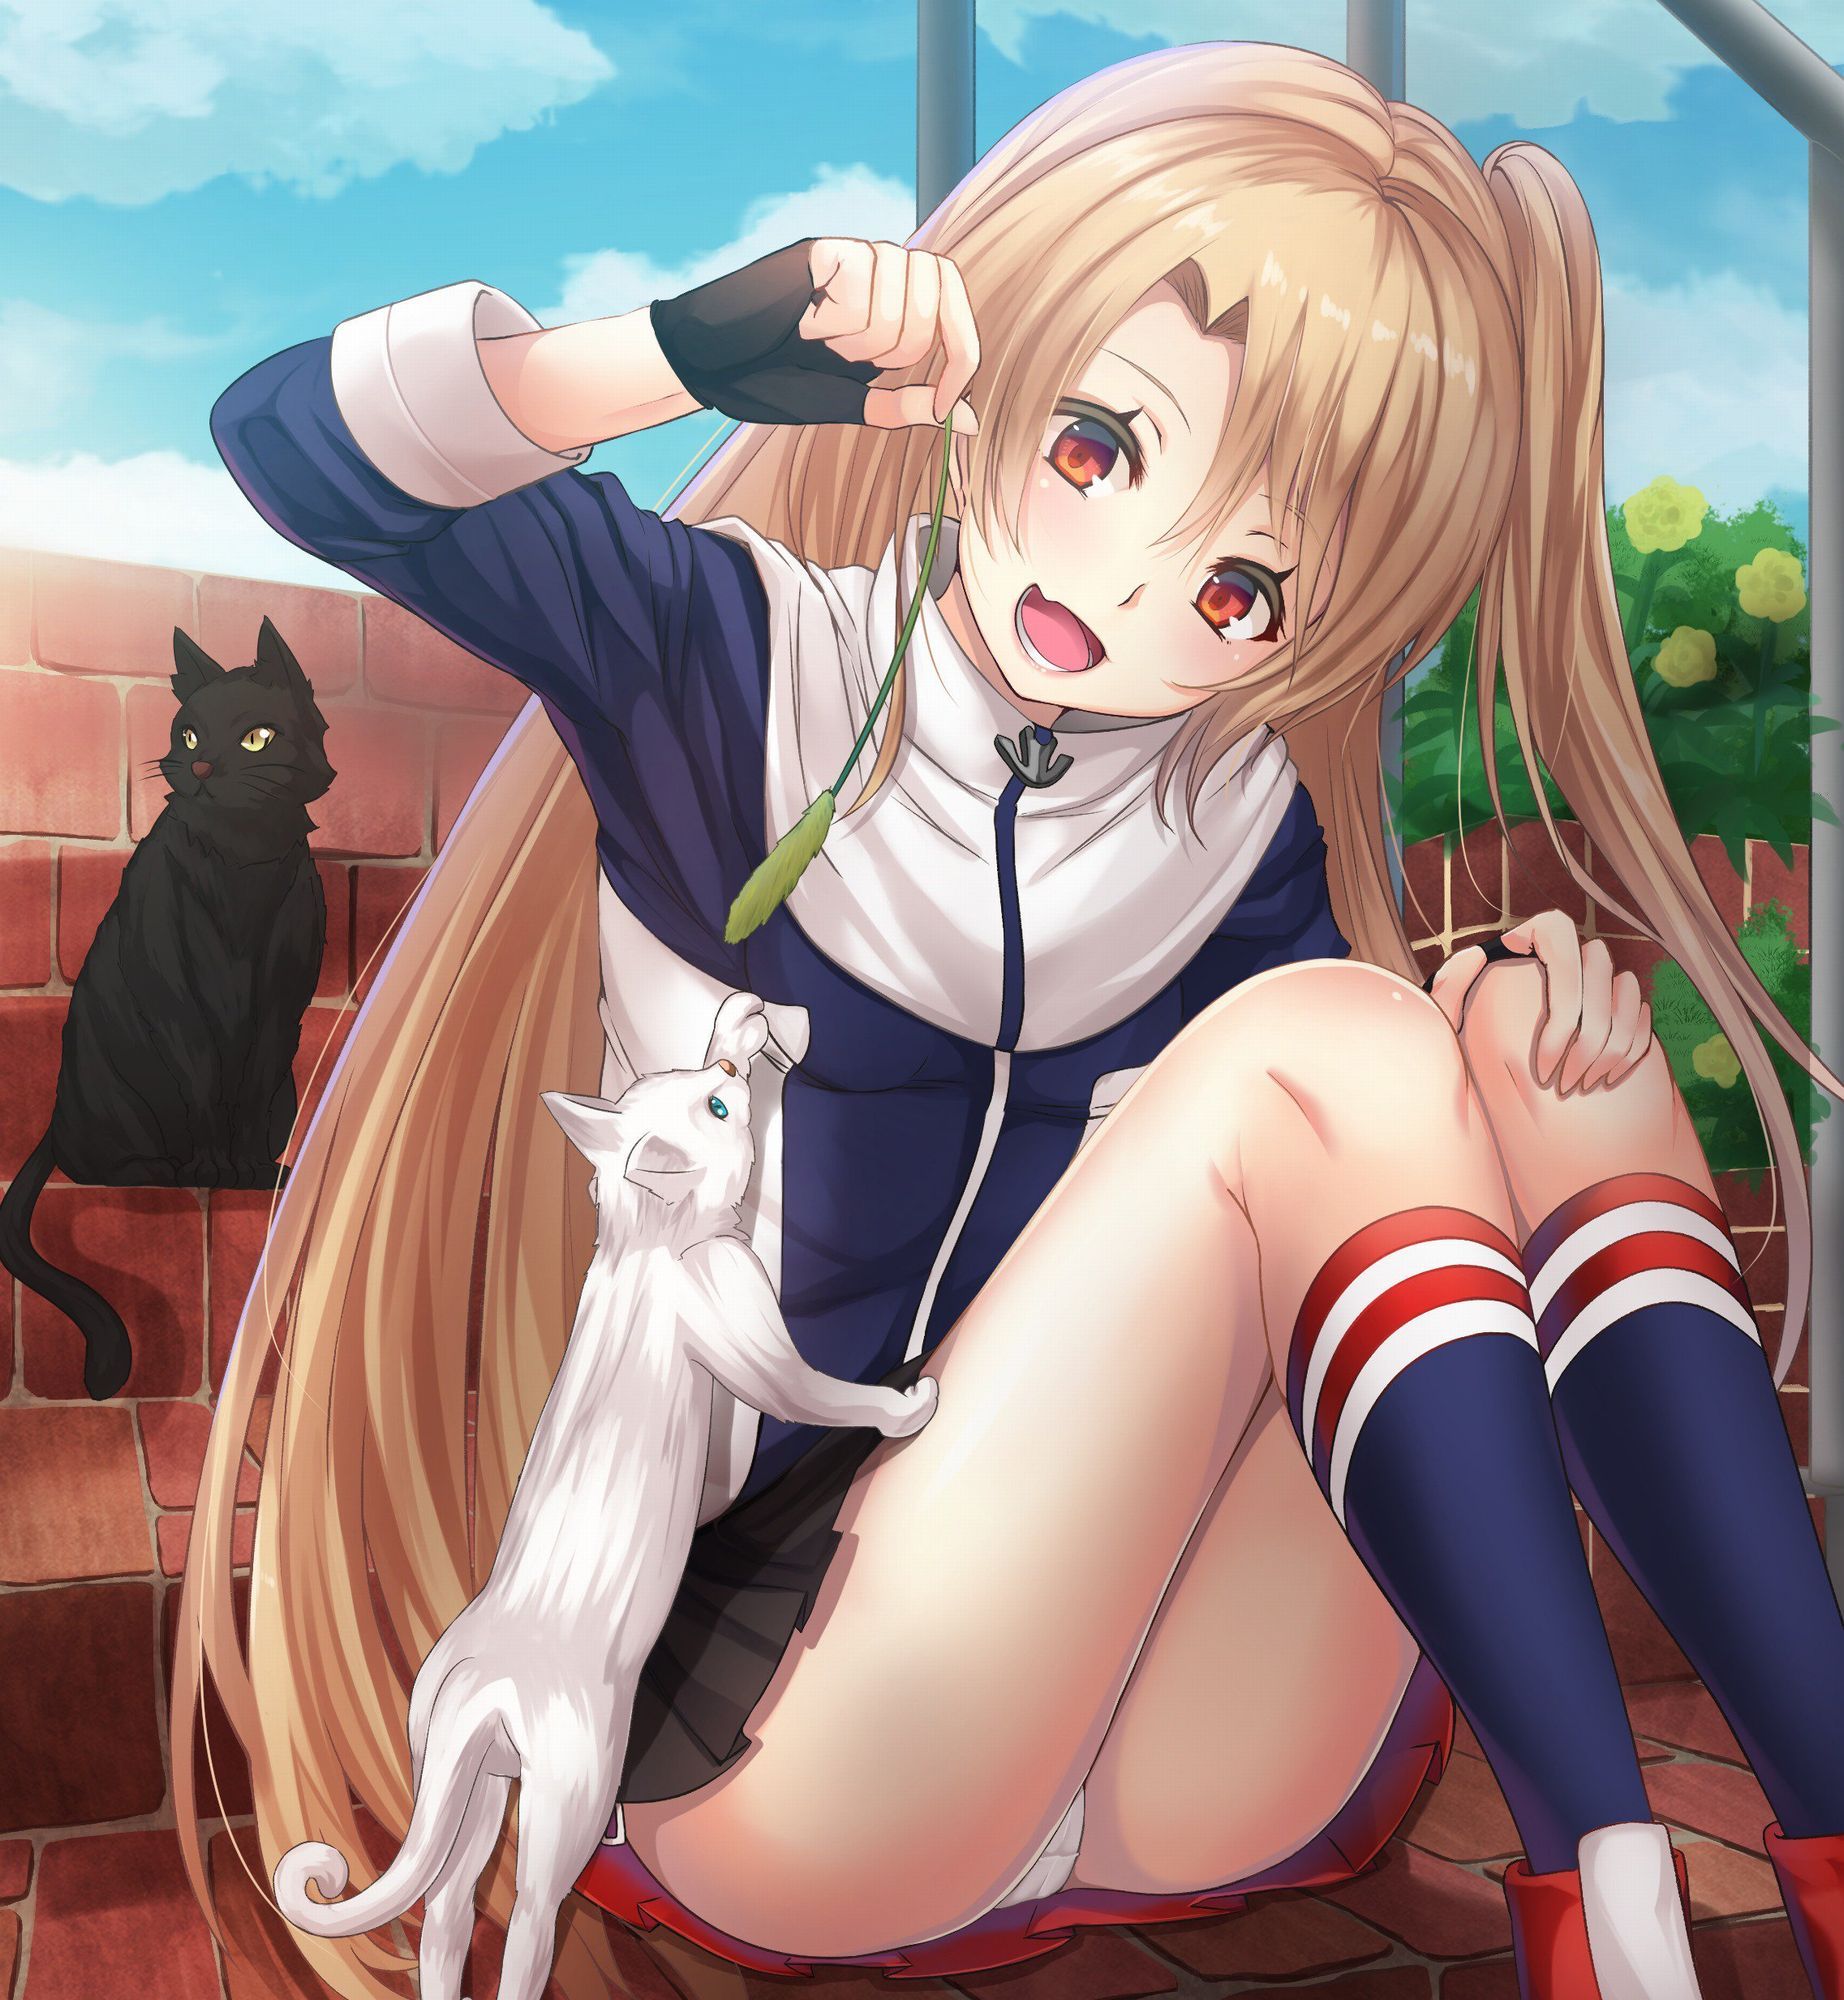 【Azur Lane】I will put cleveland's ero cute images together for free ☆ 20